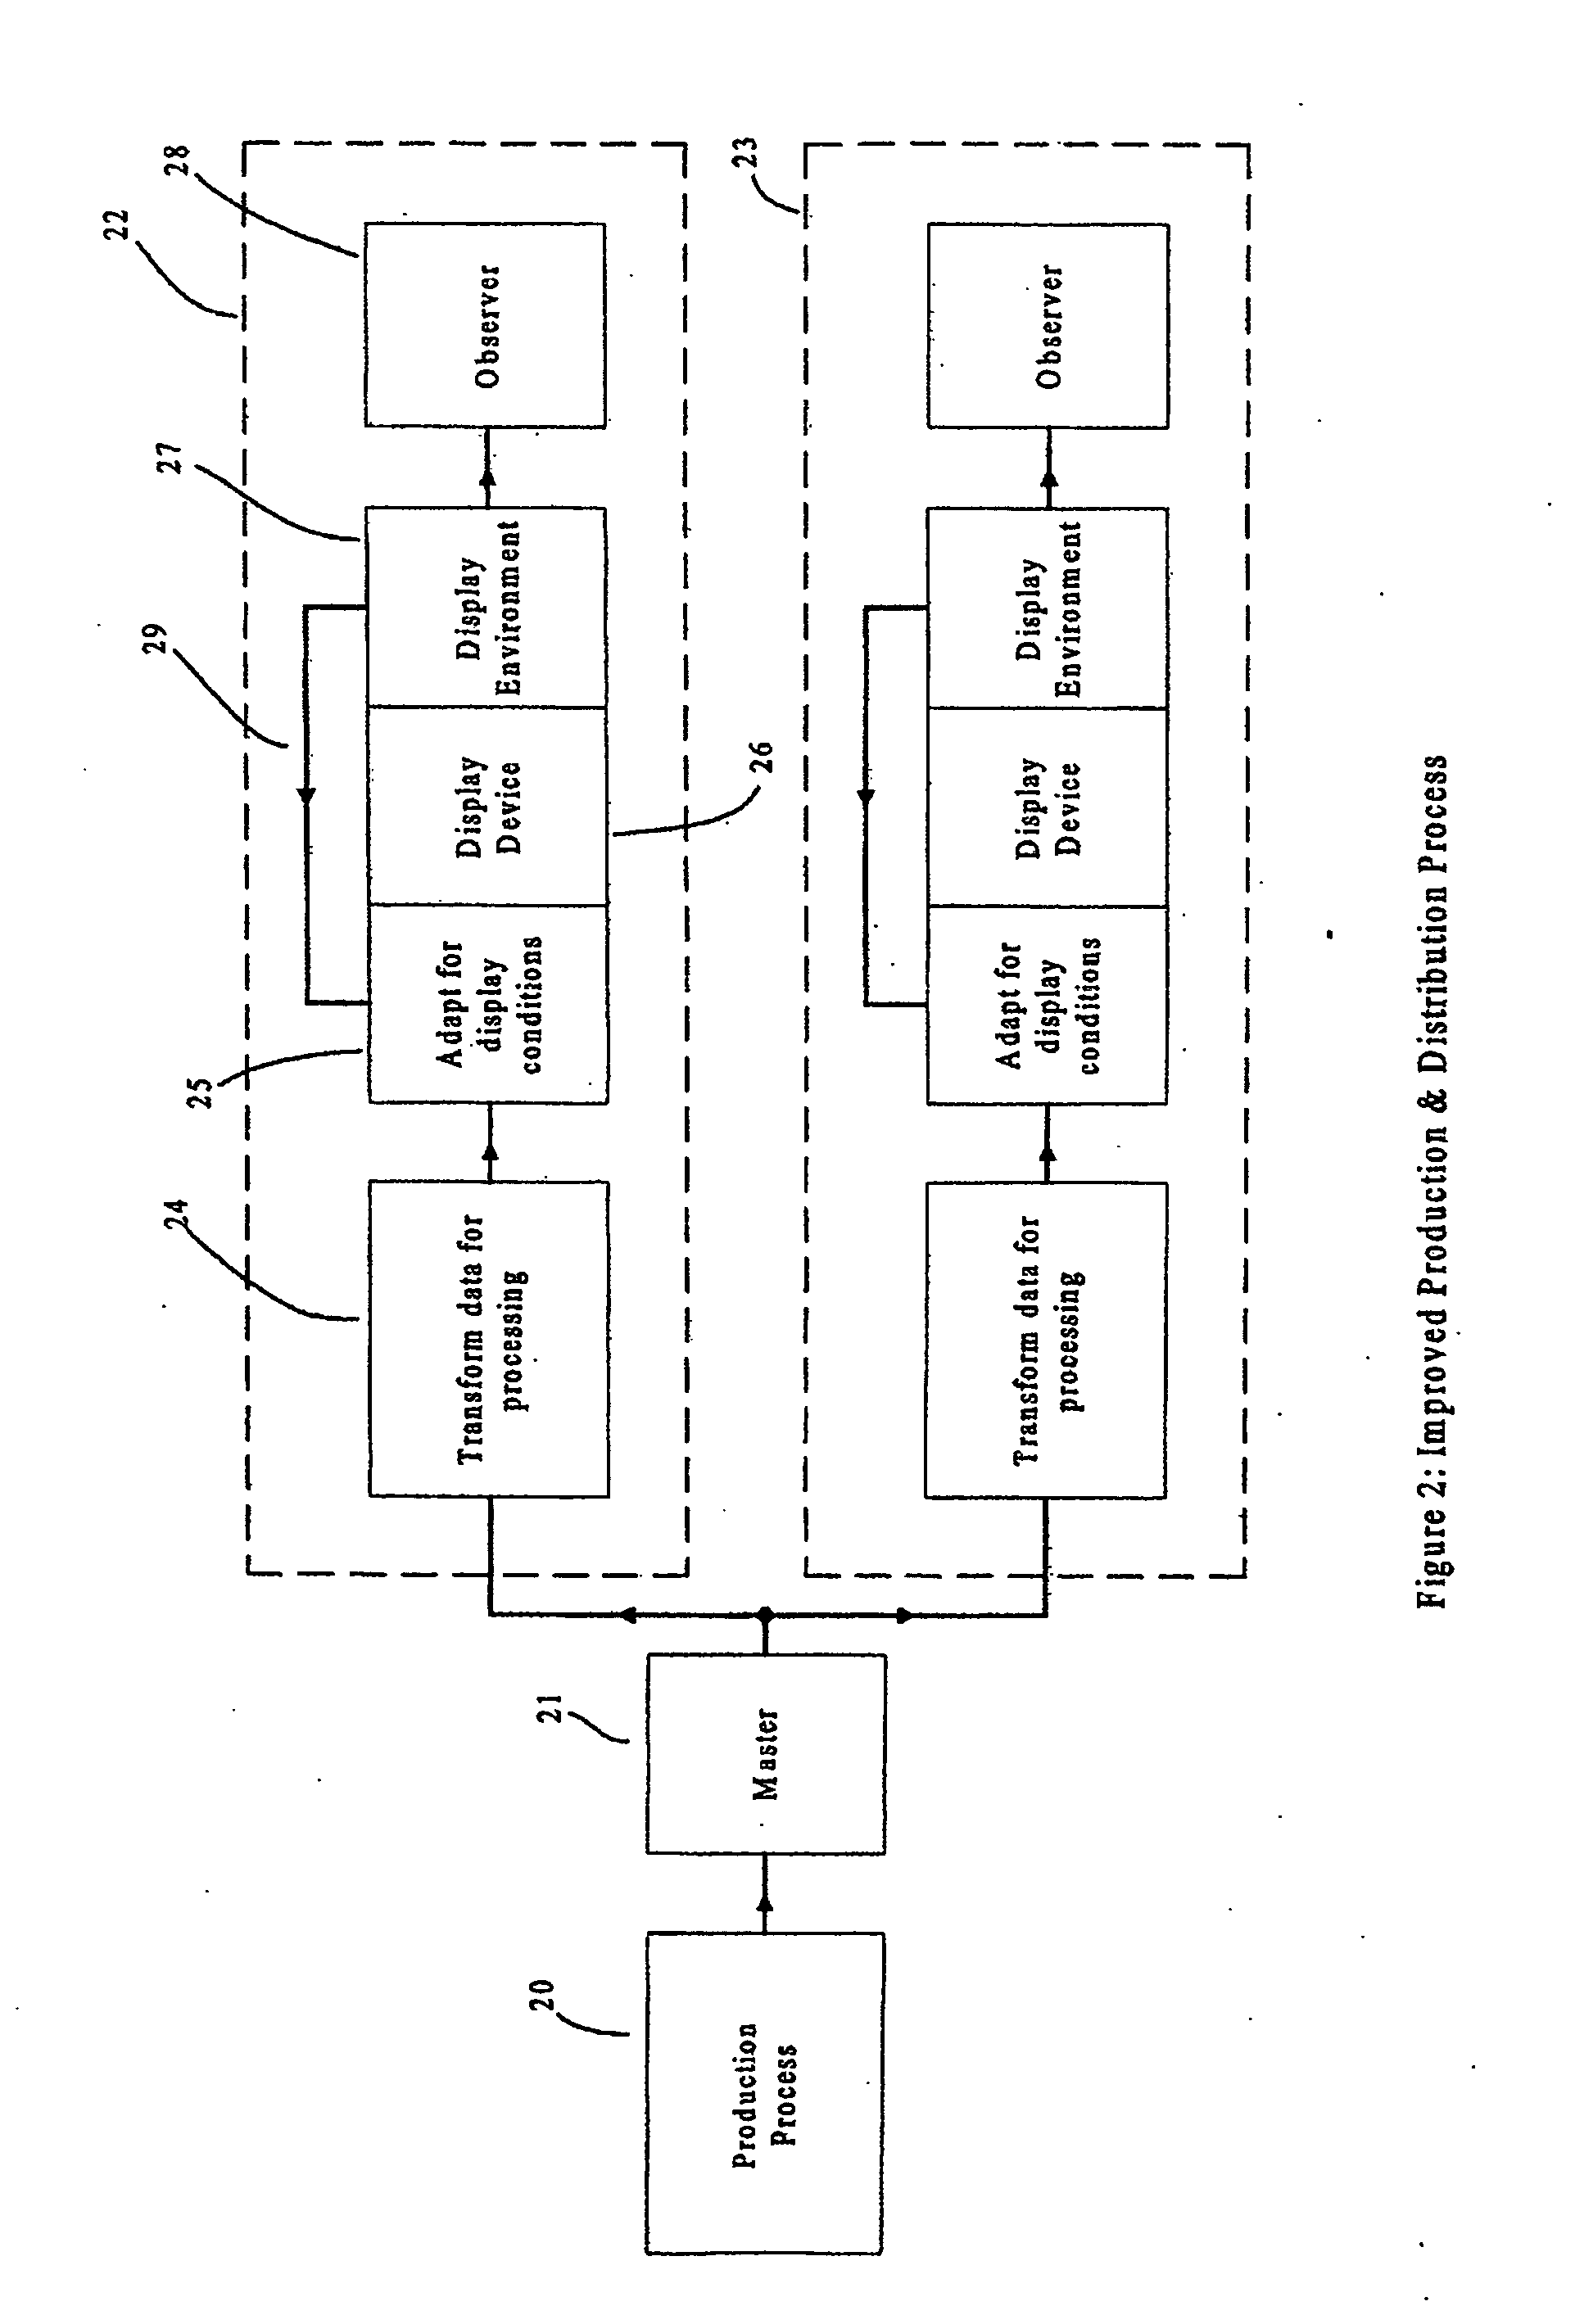 System and method for display control